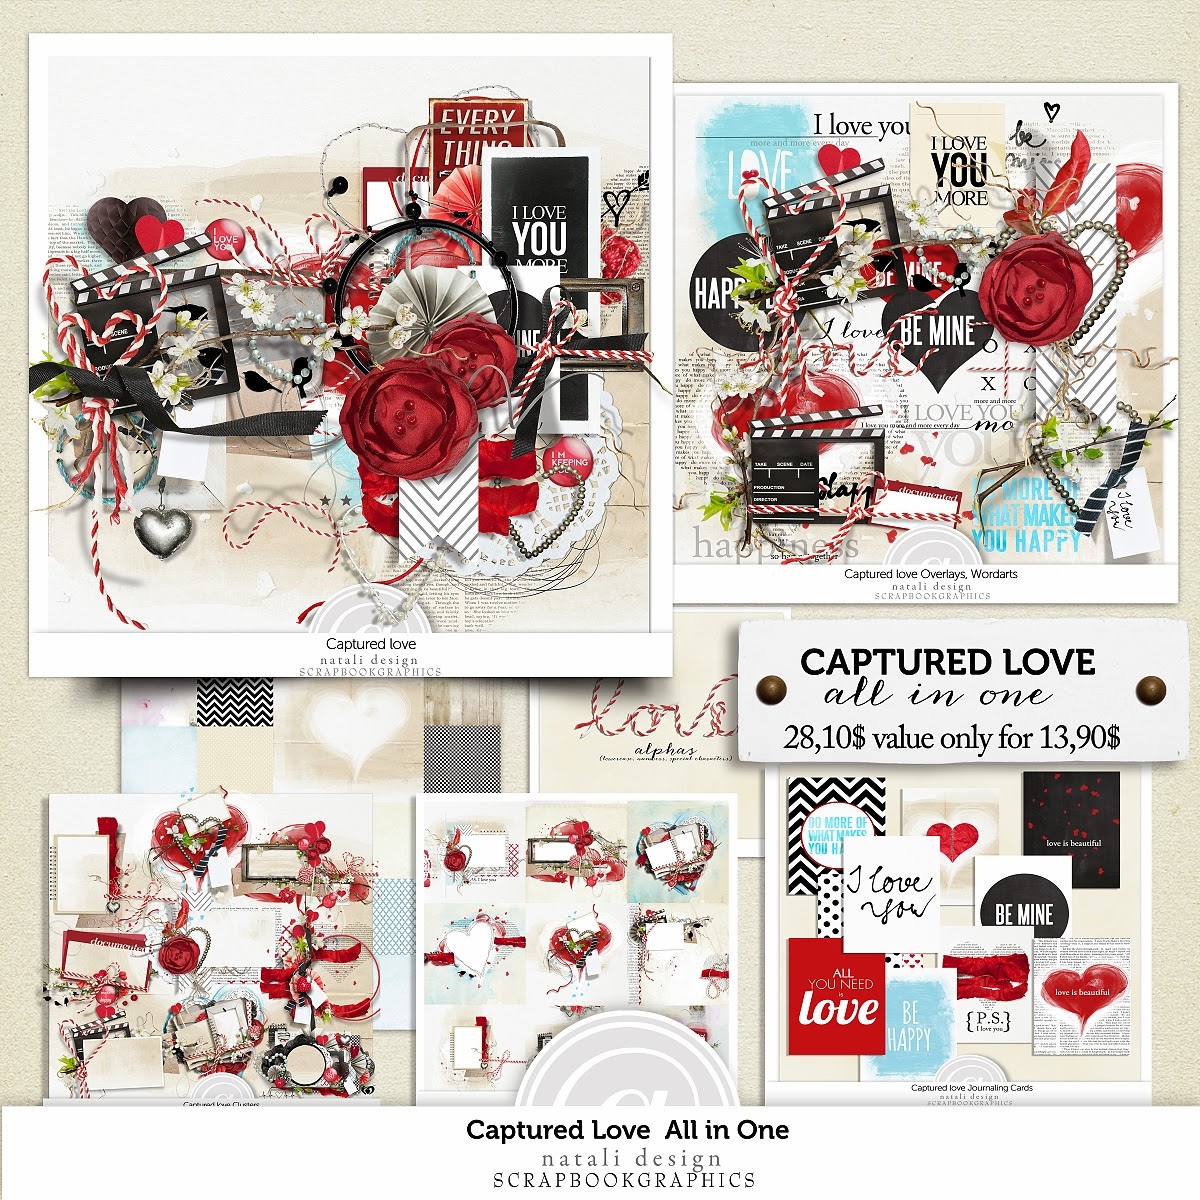 http://shop.scrapbookgraphics.com/Captured-Love-All-in-One.html